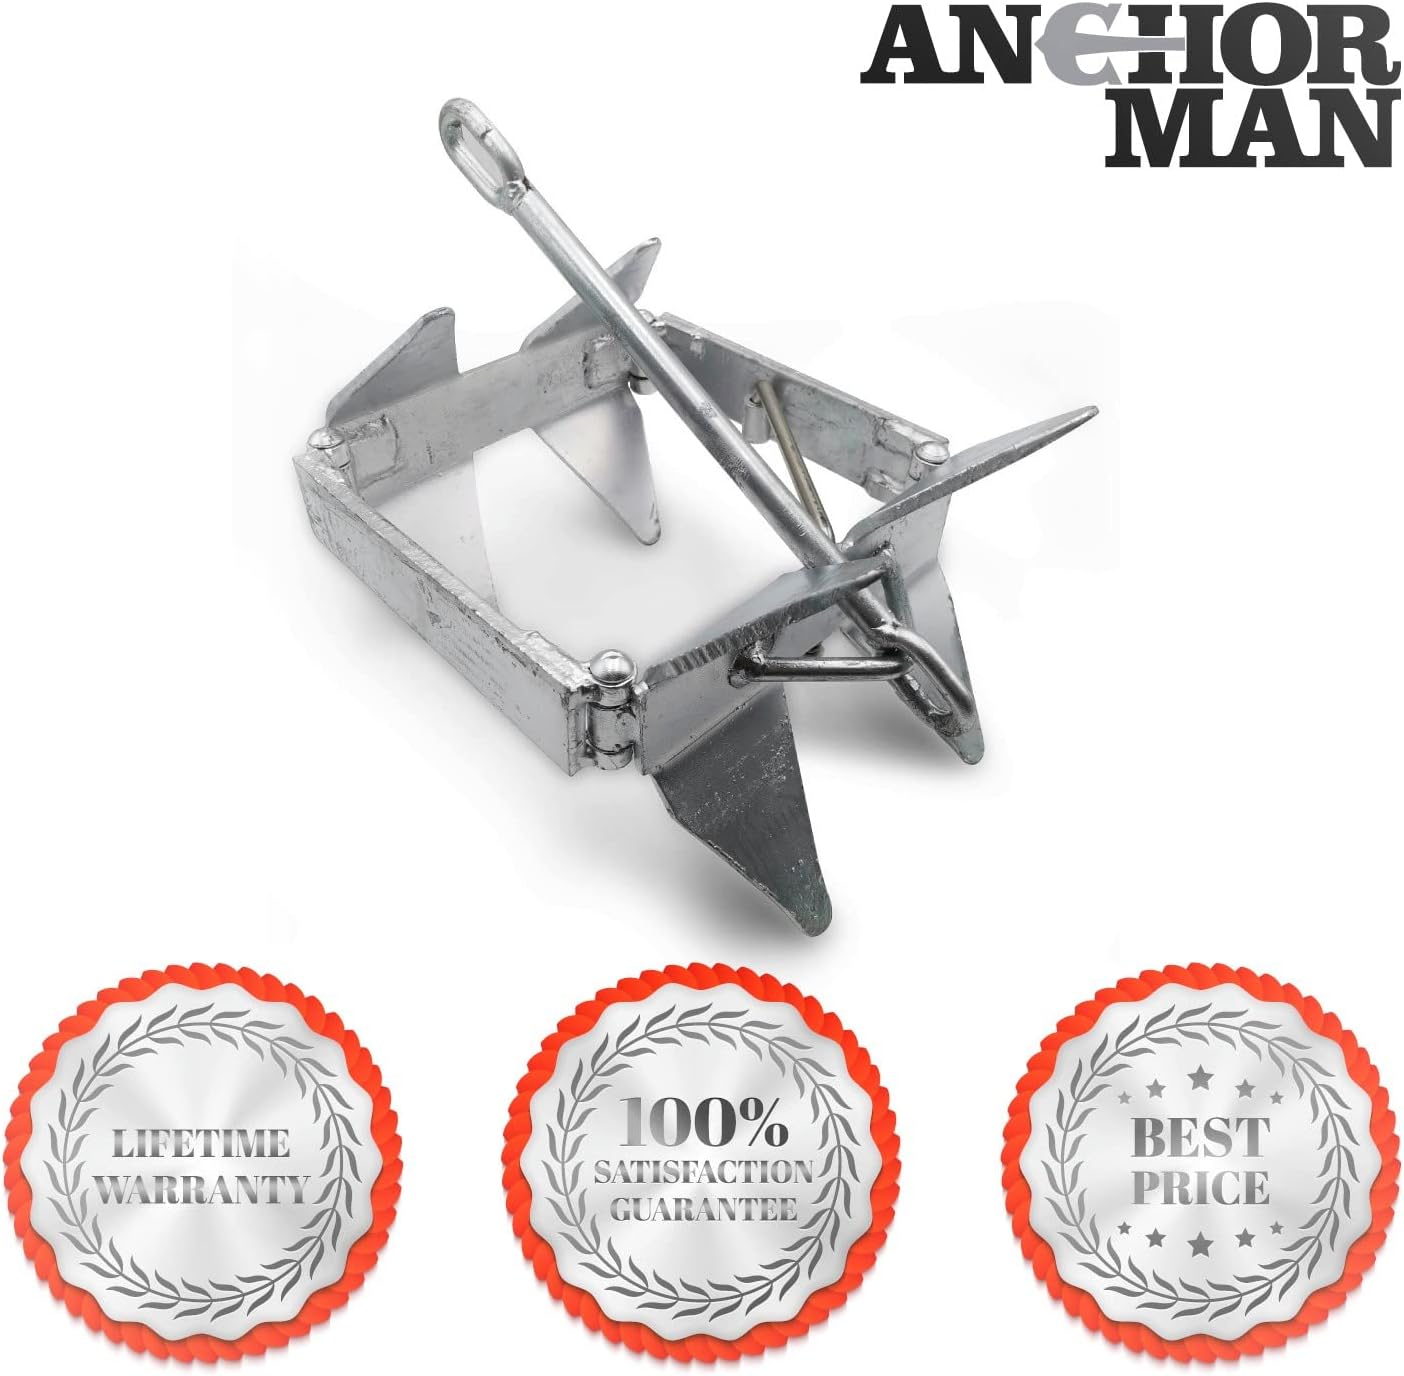 Anchor-Man Boat Slide Box Anchors, 100% Hot Dipped Galvanized Foldable Sliding Cube Anchor Suitable for 23 to 40ft Offshore Sport Boats, Pontoon Boats (13 lbs / 19 lbs / 25 lbs)